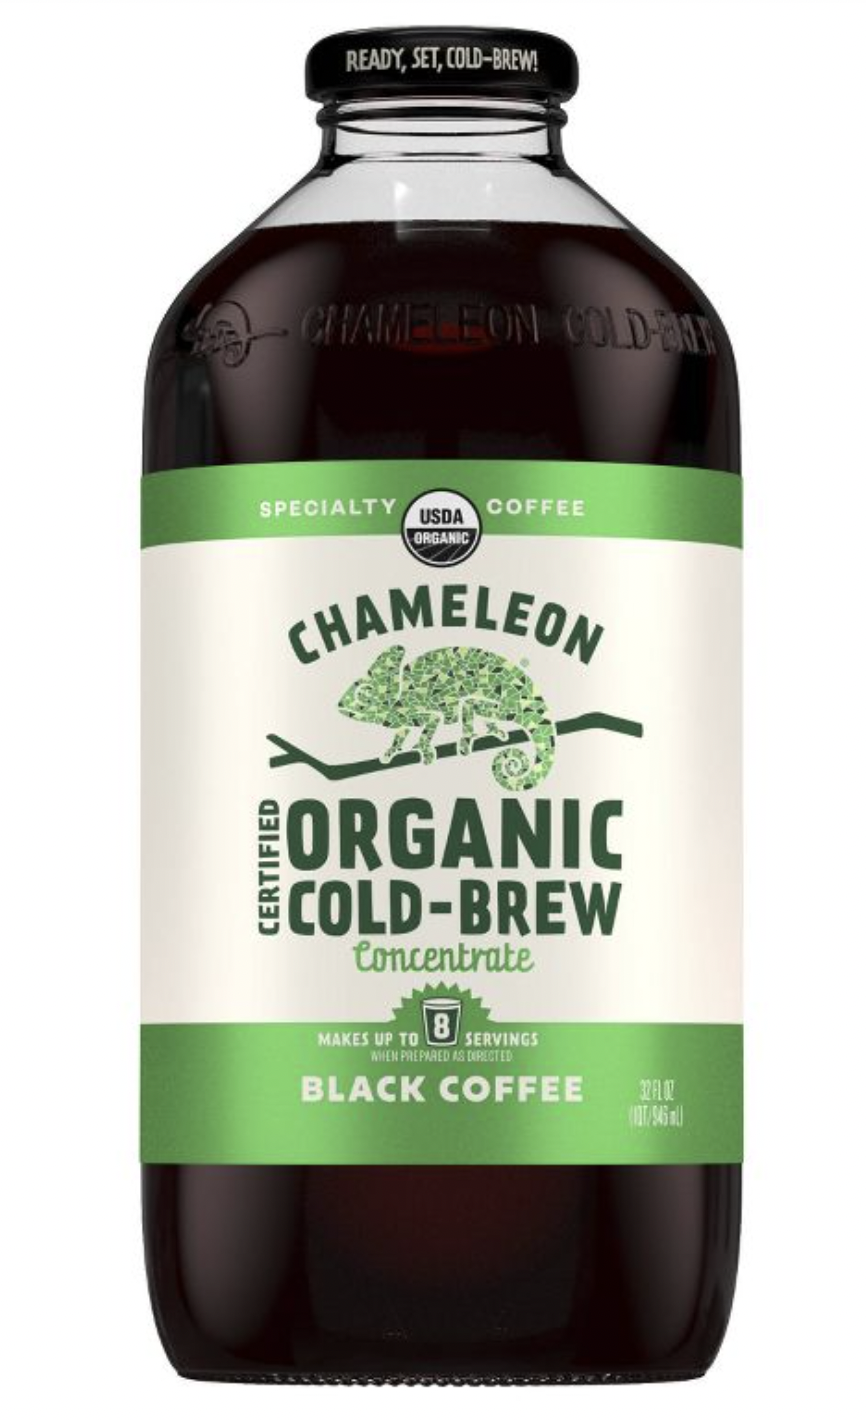 Chameleon cold brew_cold brew coffee benefits